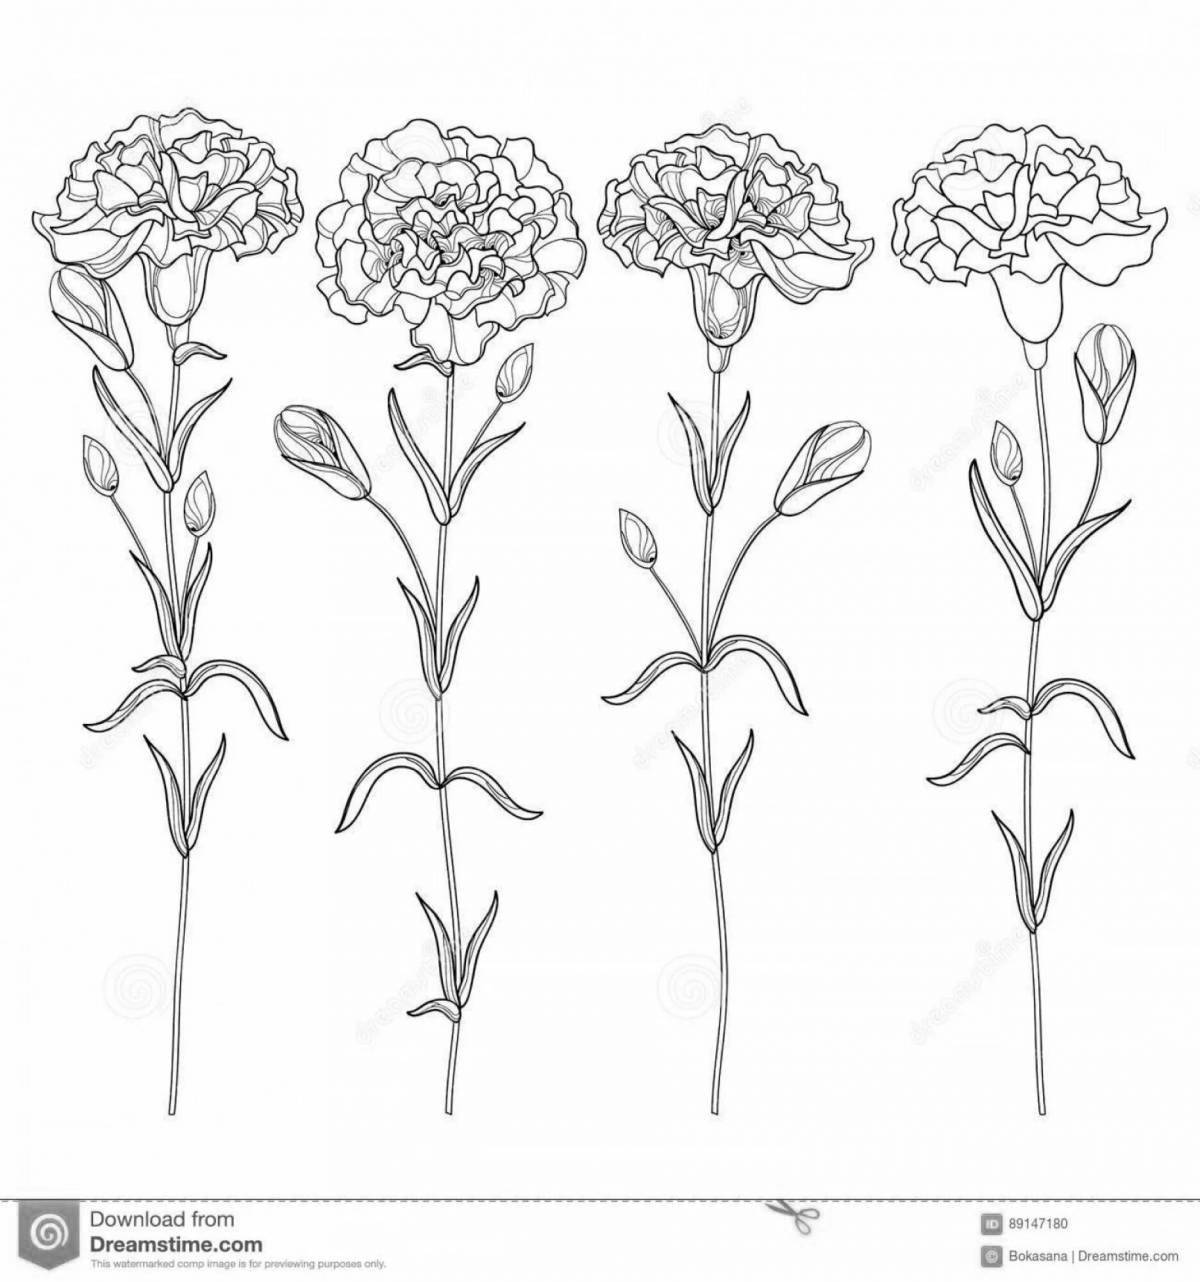 Fancy coloring 2 carnations